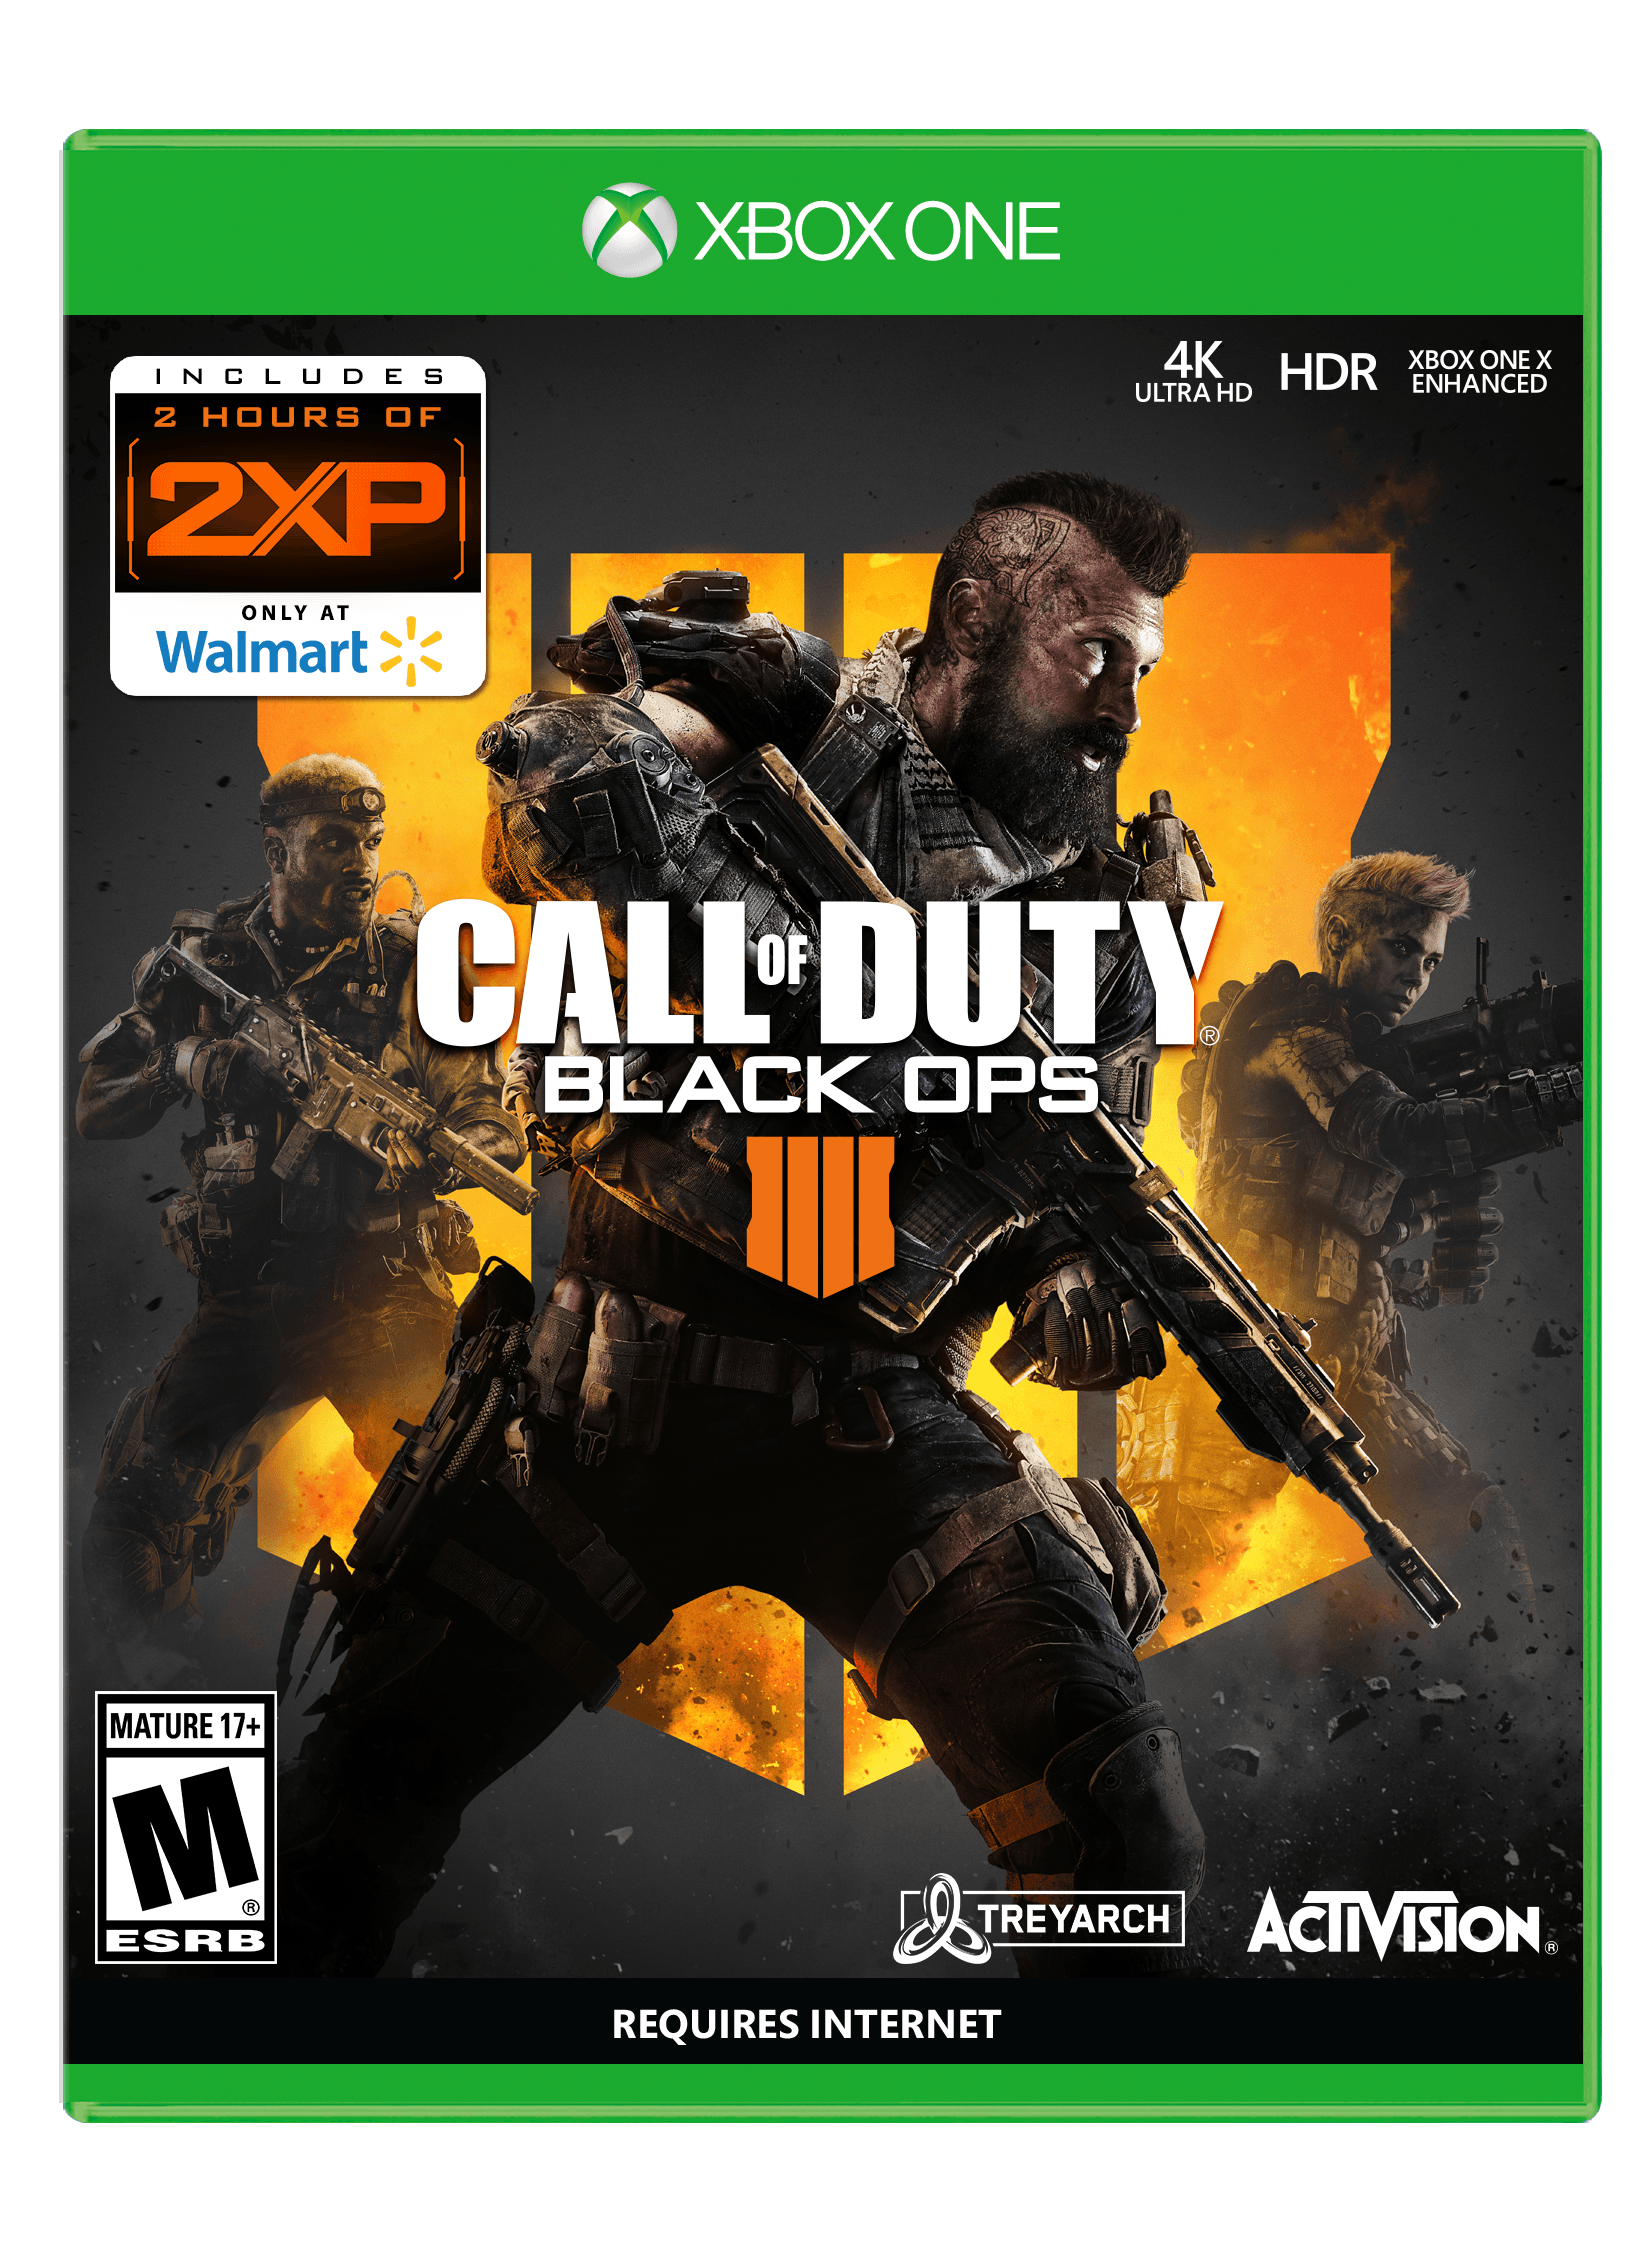 Call of Duty: Black Ops 4, Activision, Xbox One, 047875882348 - image 1 of 18